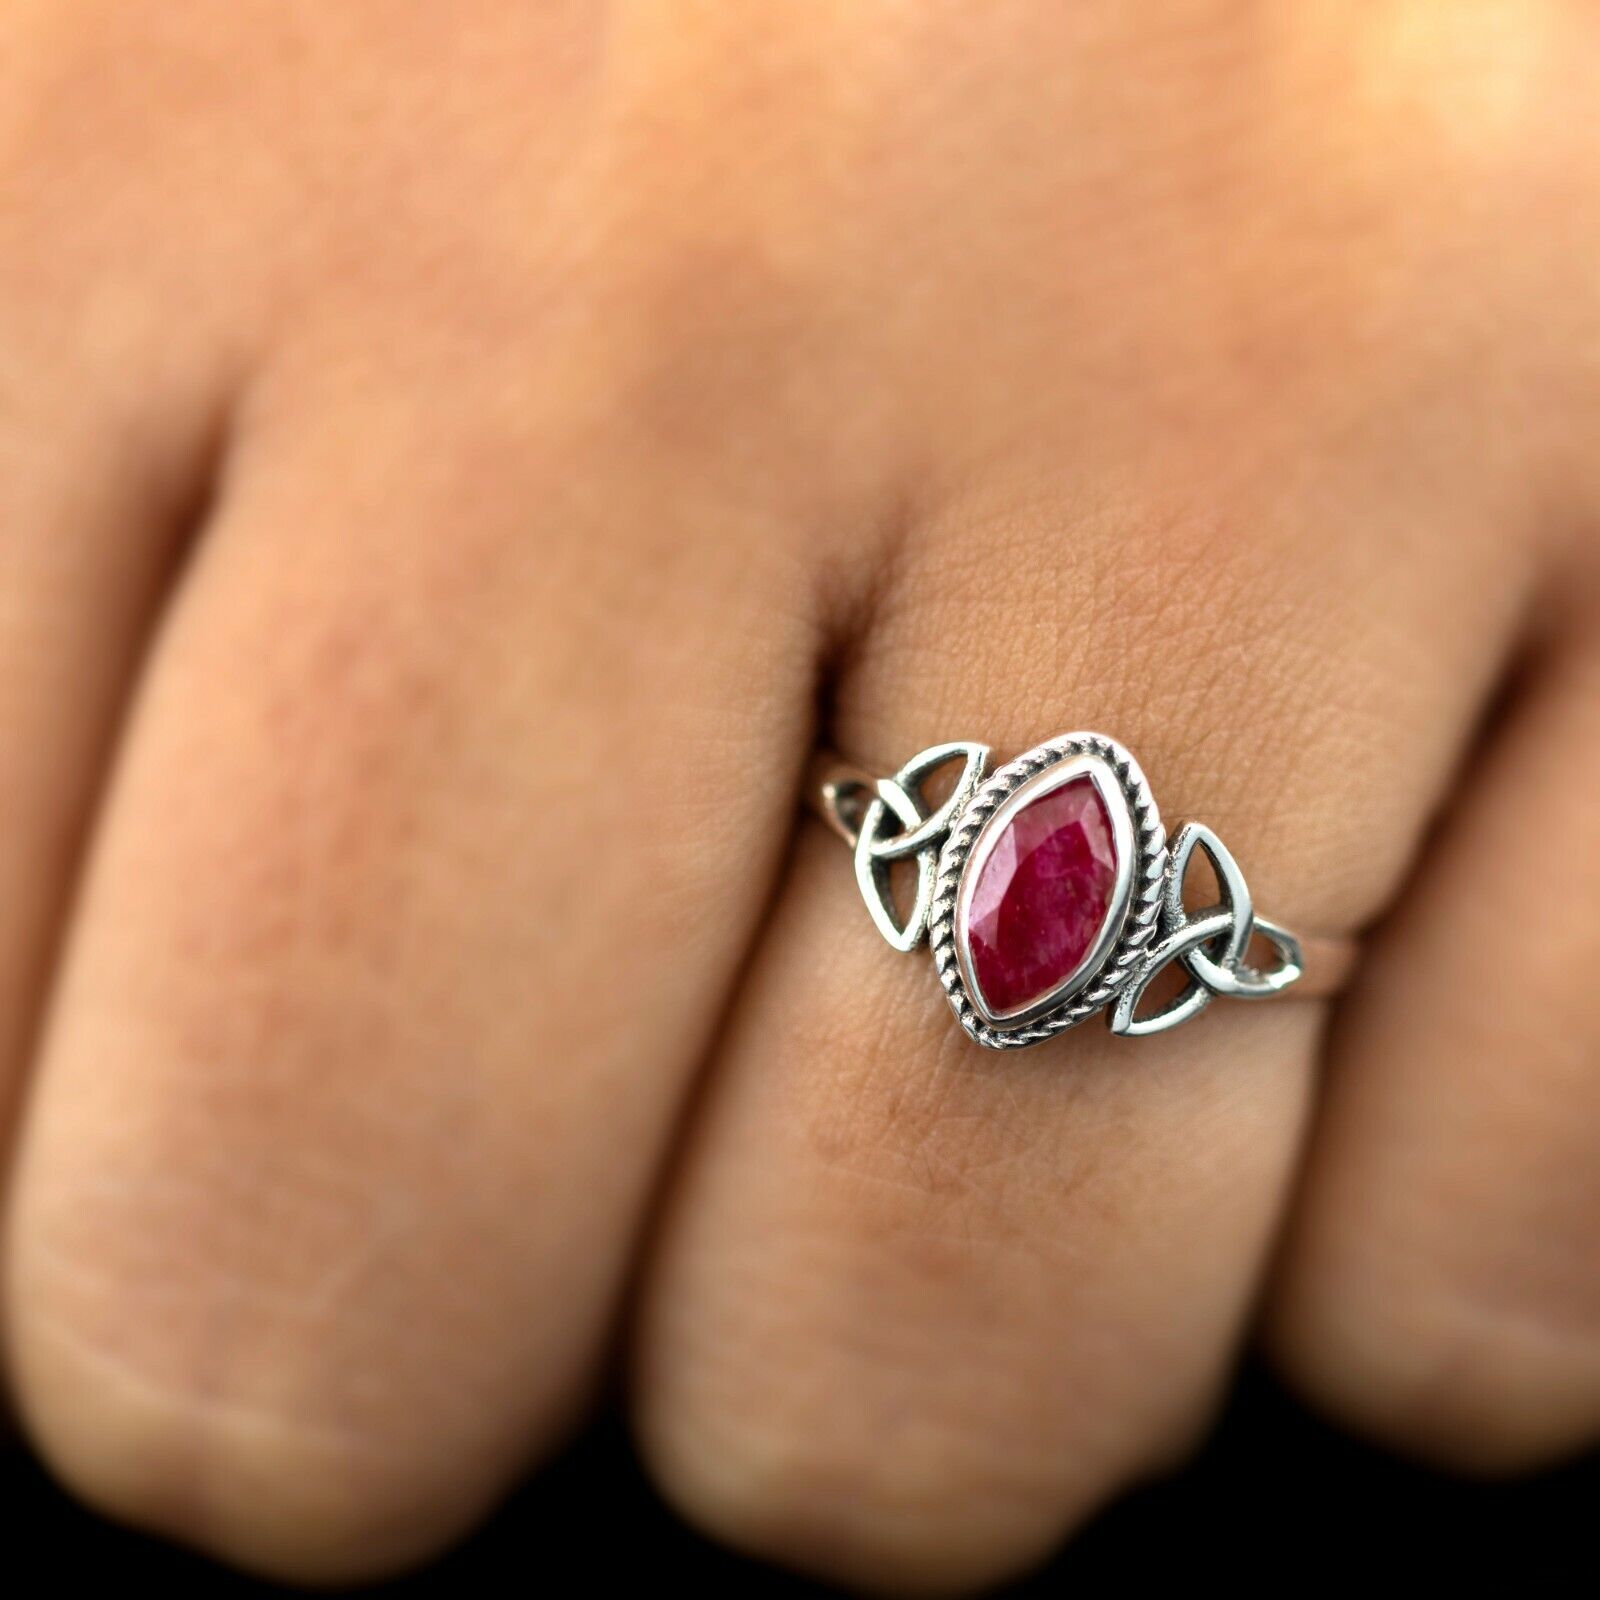 Marquise Red Ruby 925 Sterling Silver Gemstone Ladies Ring Jewellery Gift Boxed Jewelery